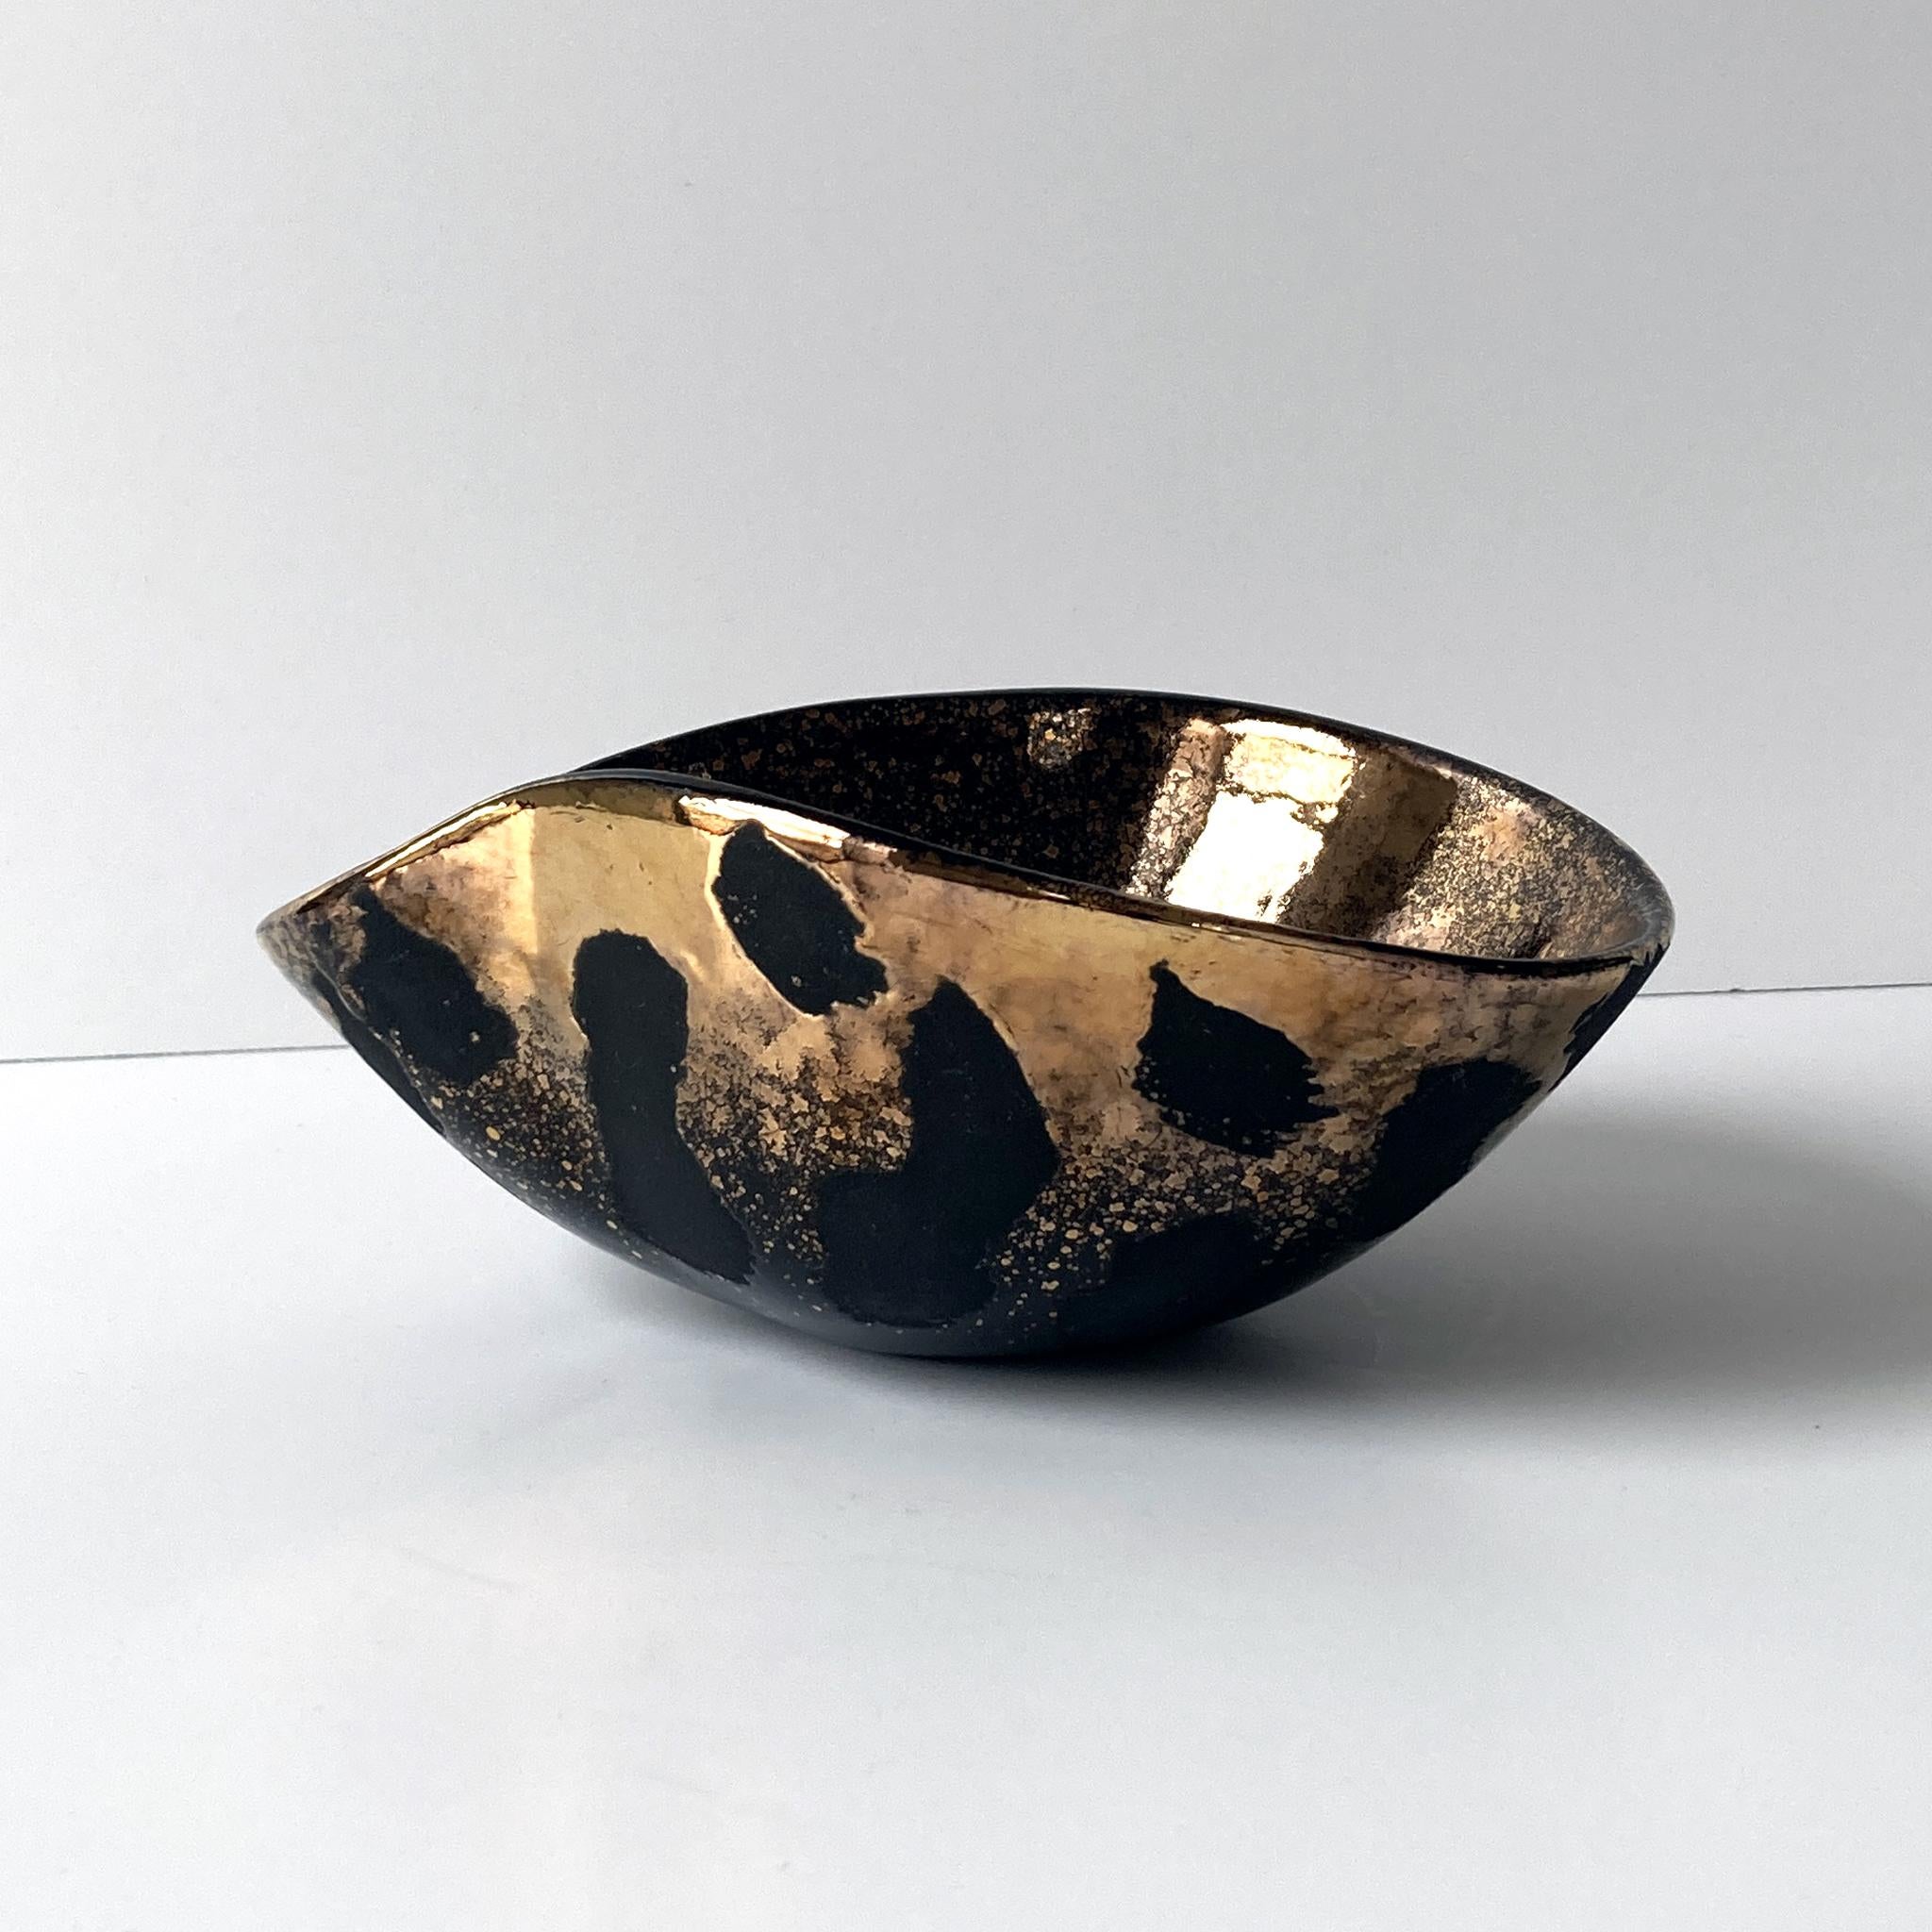 Striking gold and black centerpiece bowl by Westwood Ware California Pottery. The gold contrasts beautifully with the matte black pattern on the outside, this piece is stunning at different angles. Signed, Westwood Calif 711. In good vintage